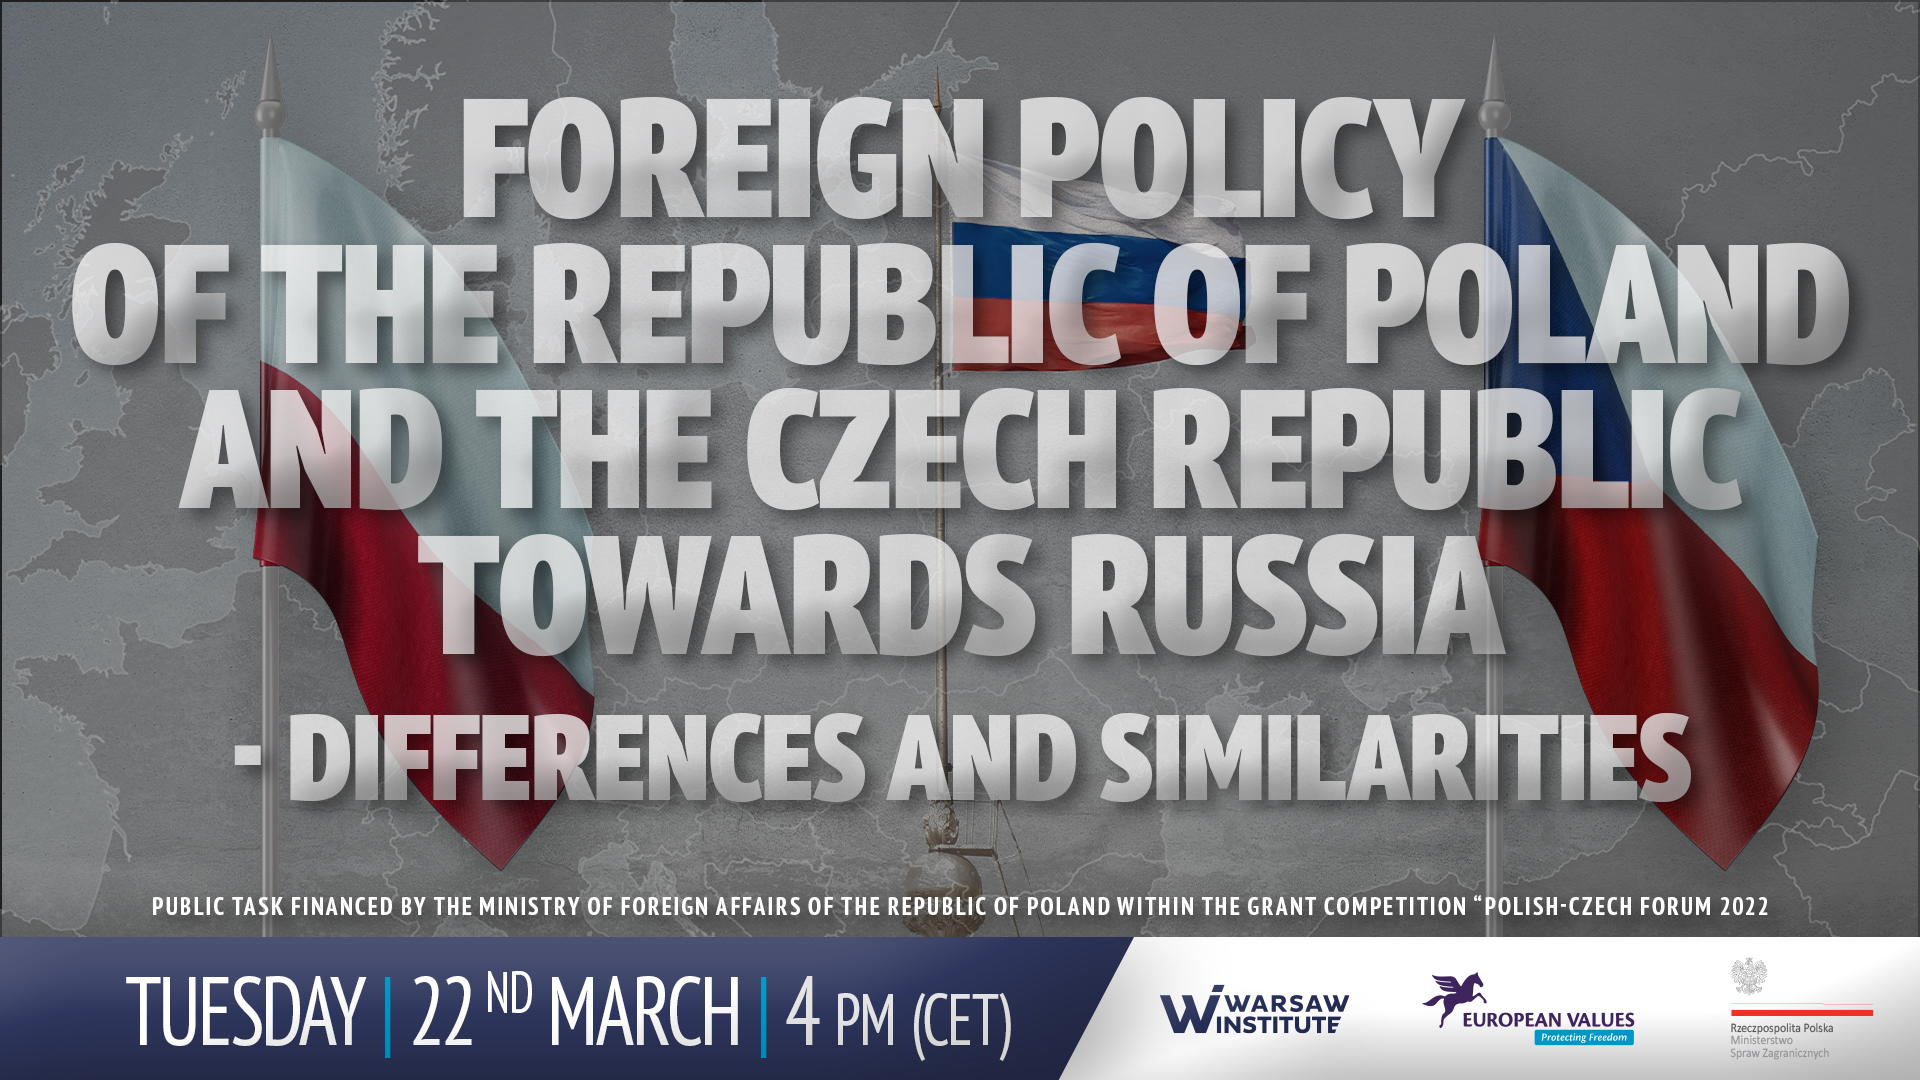 Foreign Policy of the Republic of Poland and the Czech Republic Towards Russia